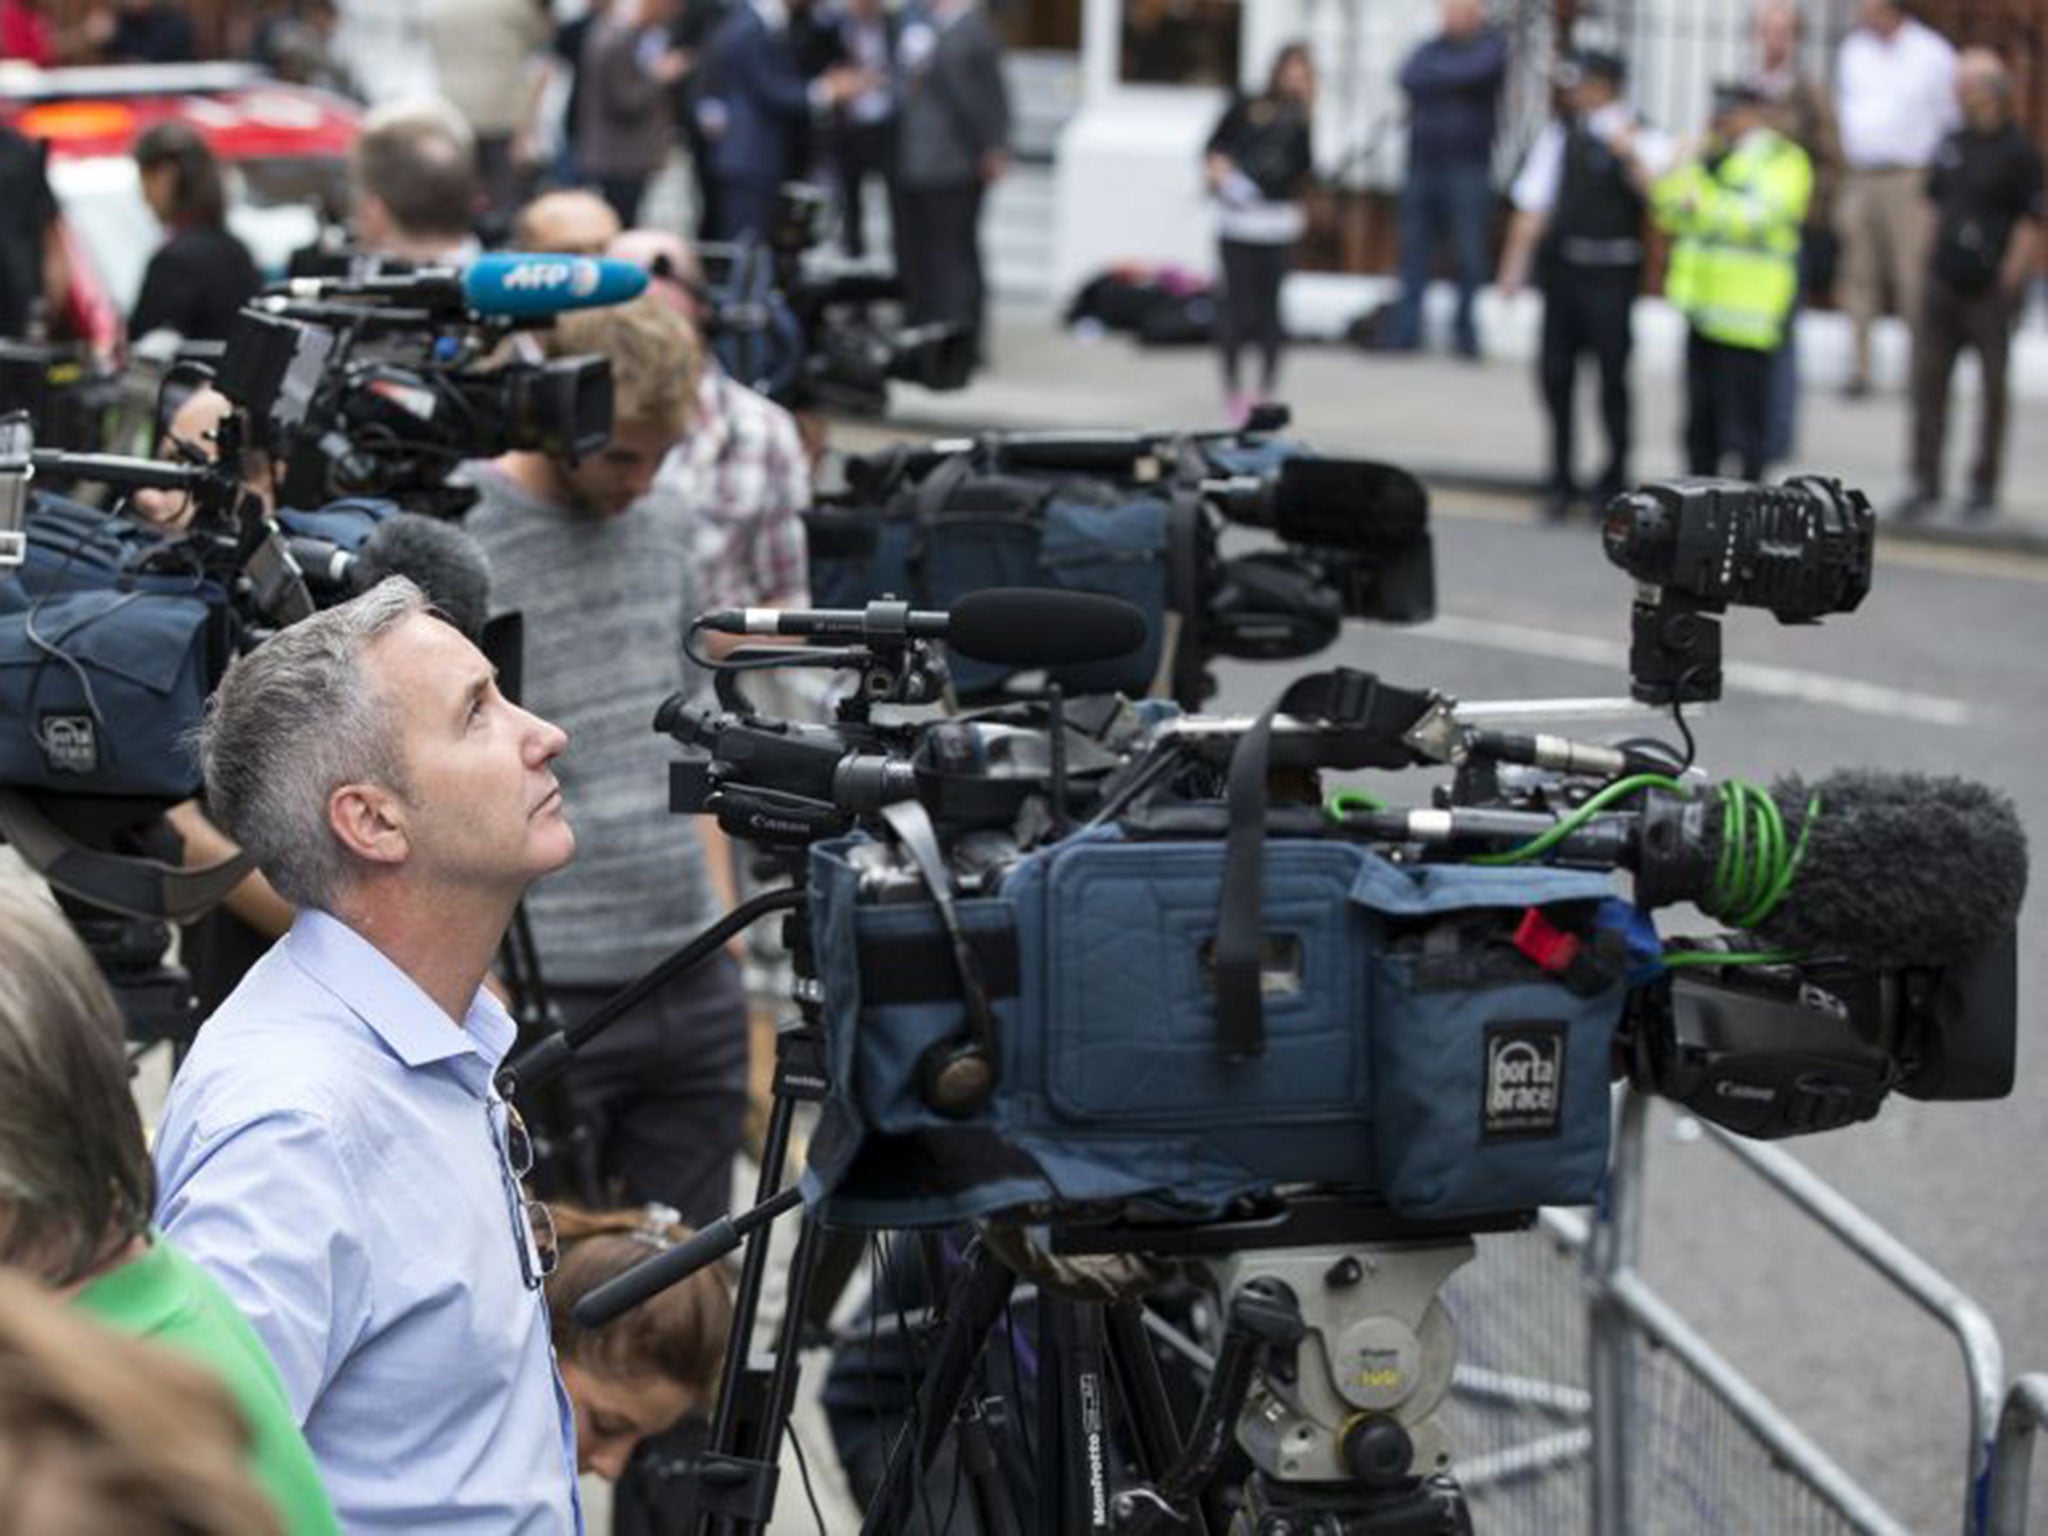 Members of the media outside the Ecuadorean embassy in London on Tuesday, where Julian Assange gave a press conference